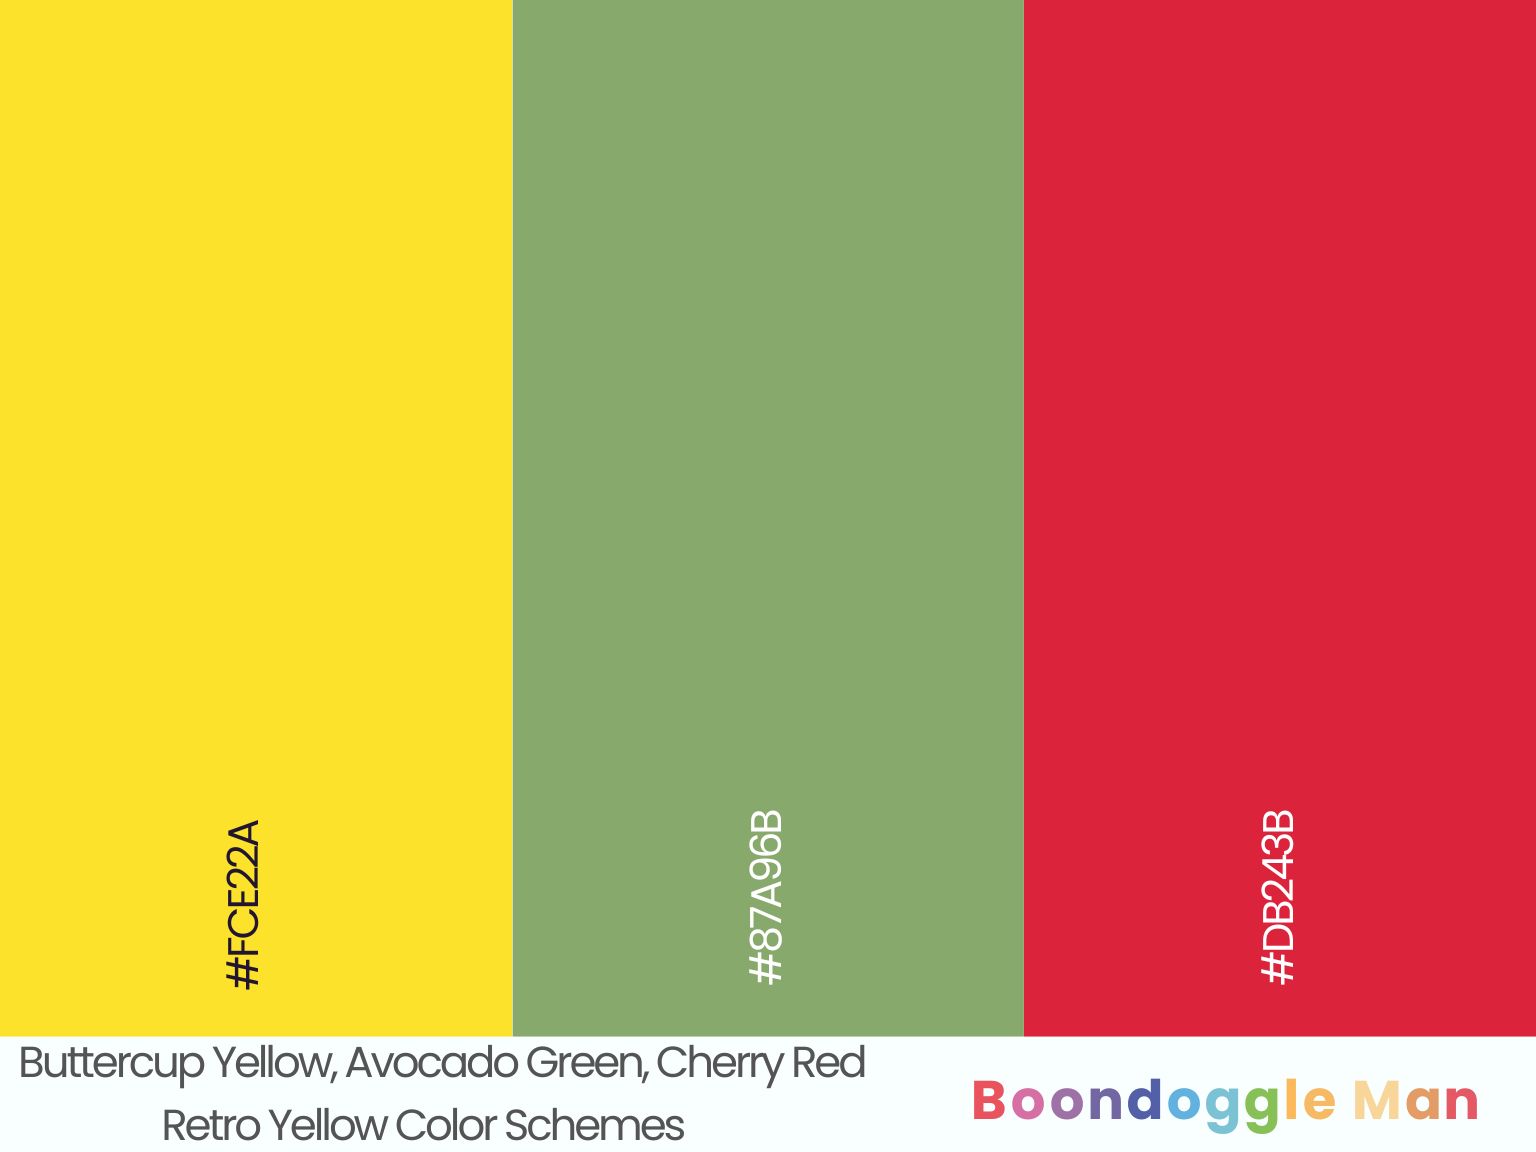 Buttercup Yellow, Avocado Green, Cherry Red